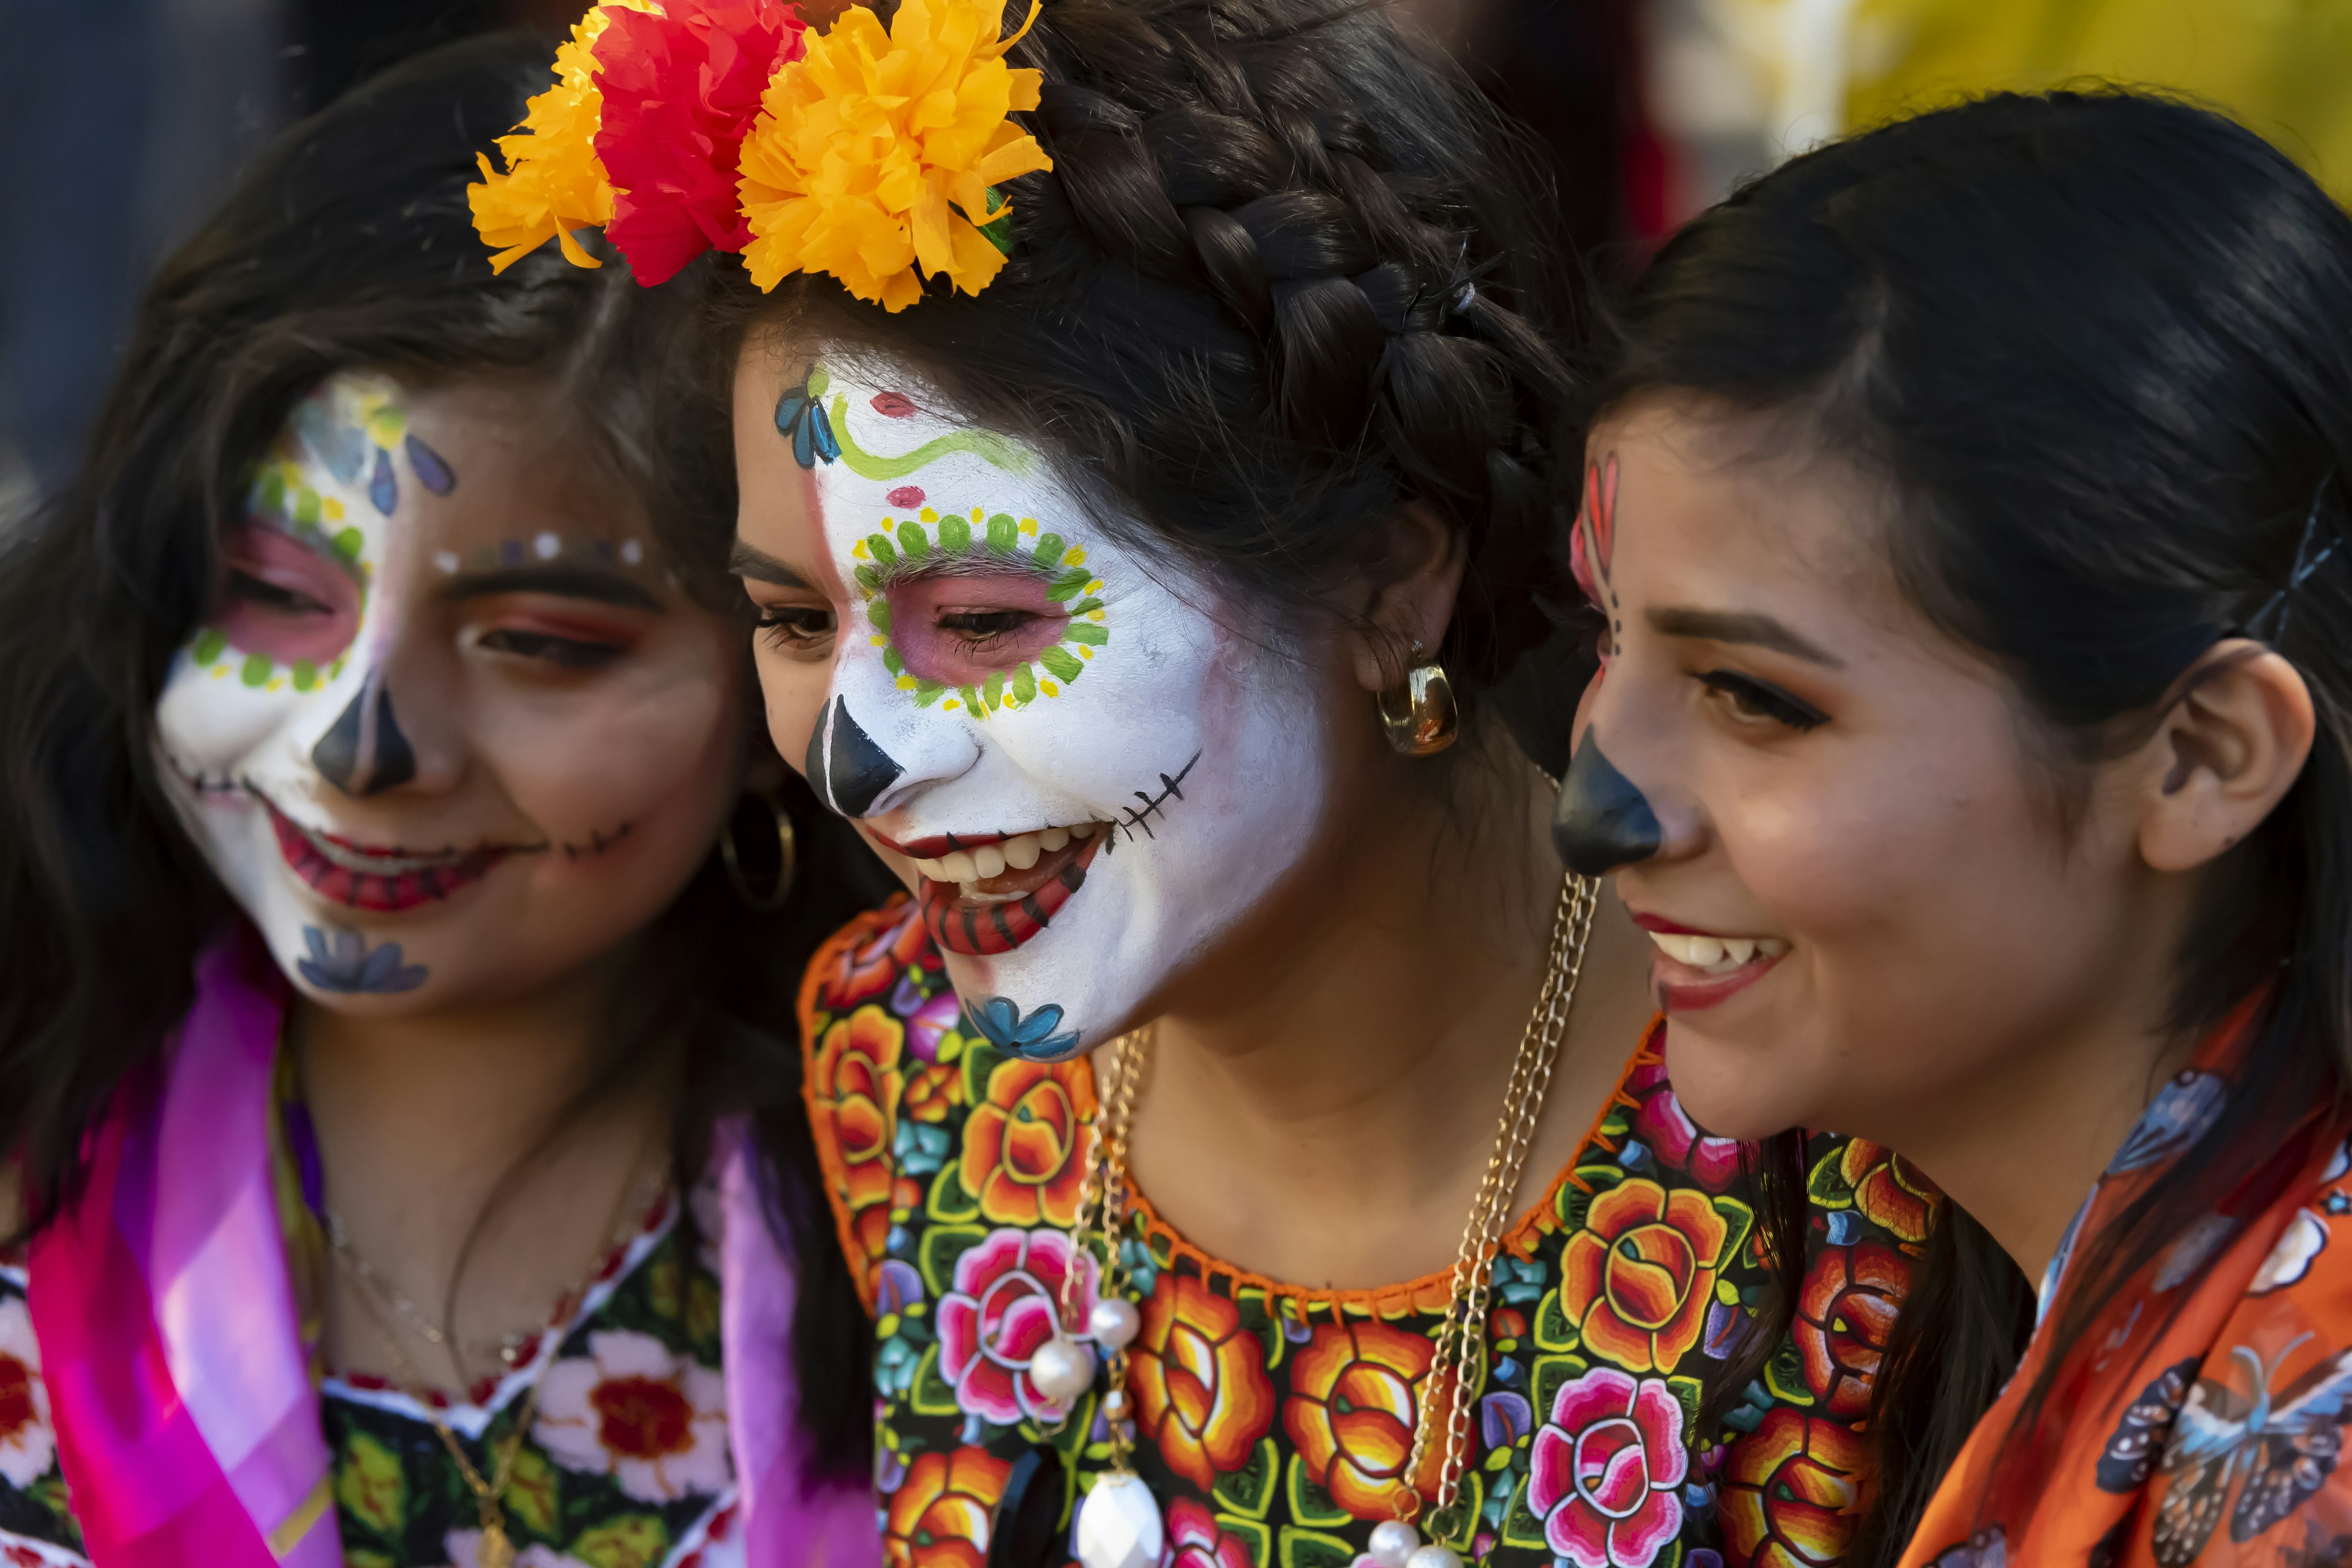 October 31, 2018: Three friends in costume and makeup in the zócalo (city square) for the Día de los Muertos festival.